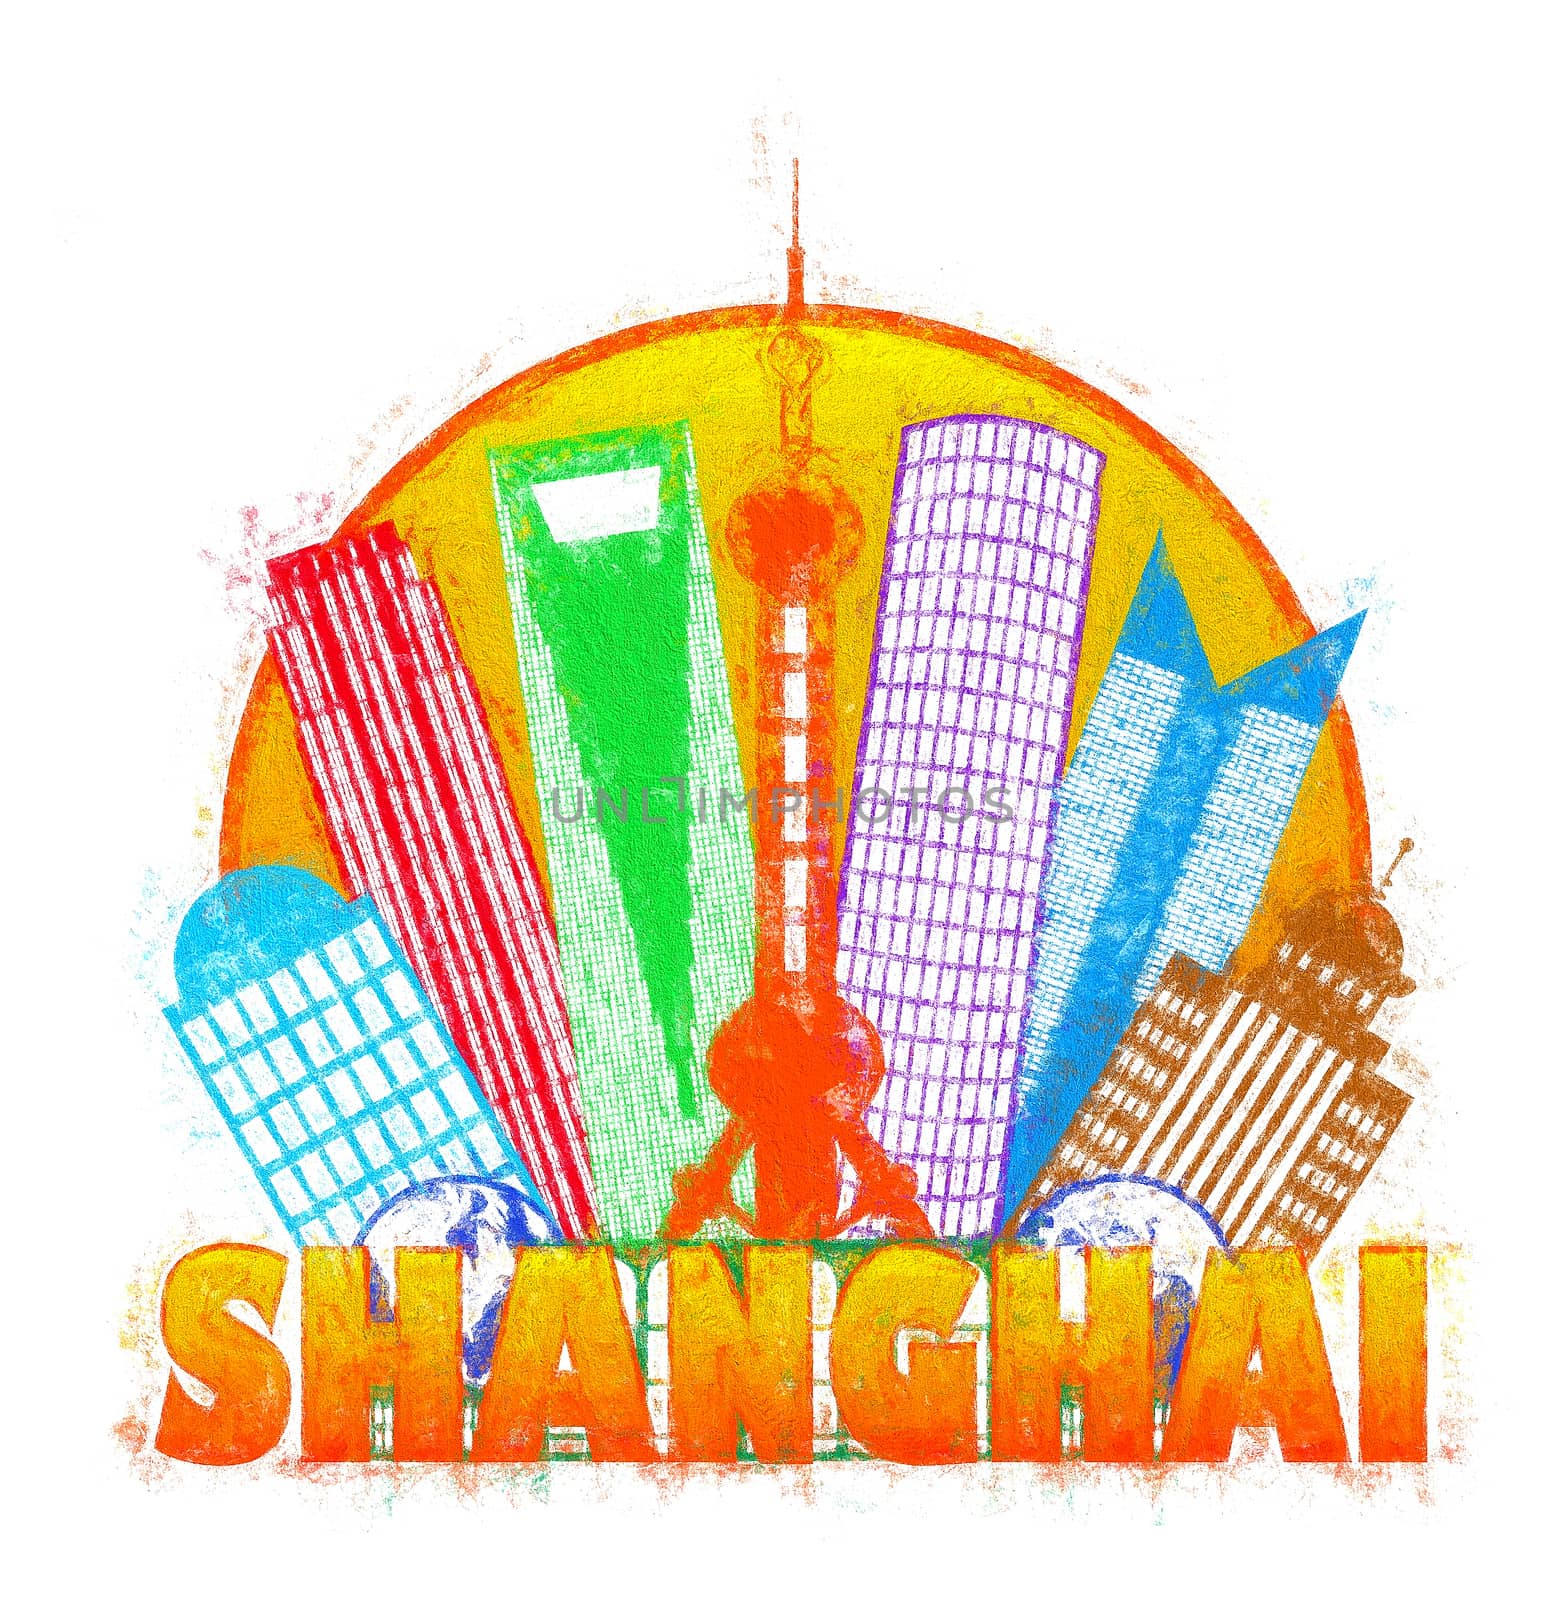 Shanghai China City Skyline Outline Silhouette in Circle Color Isolated on White Background Impressionist Illustration